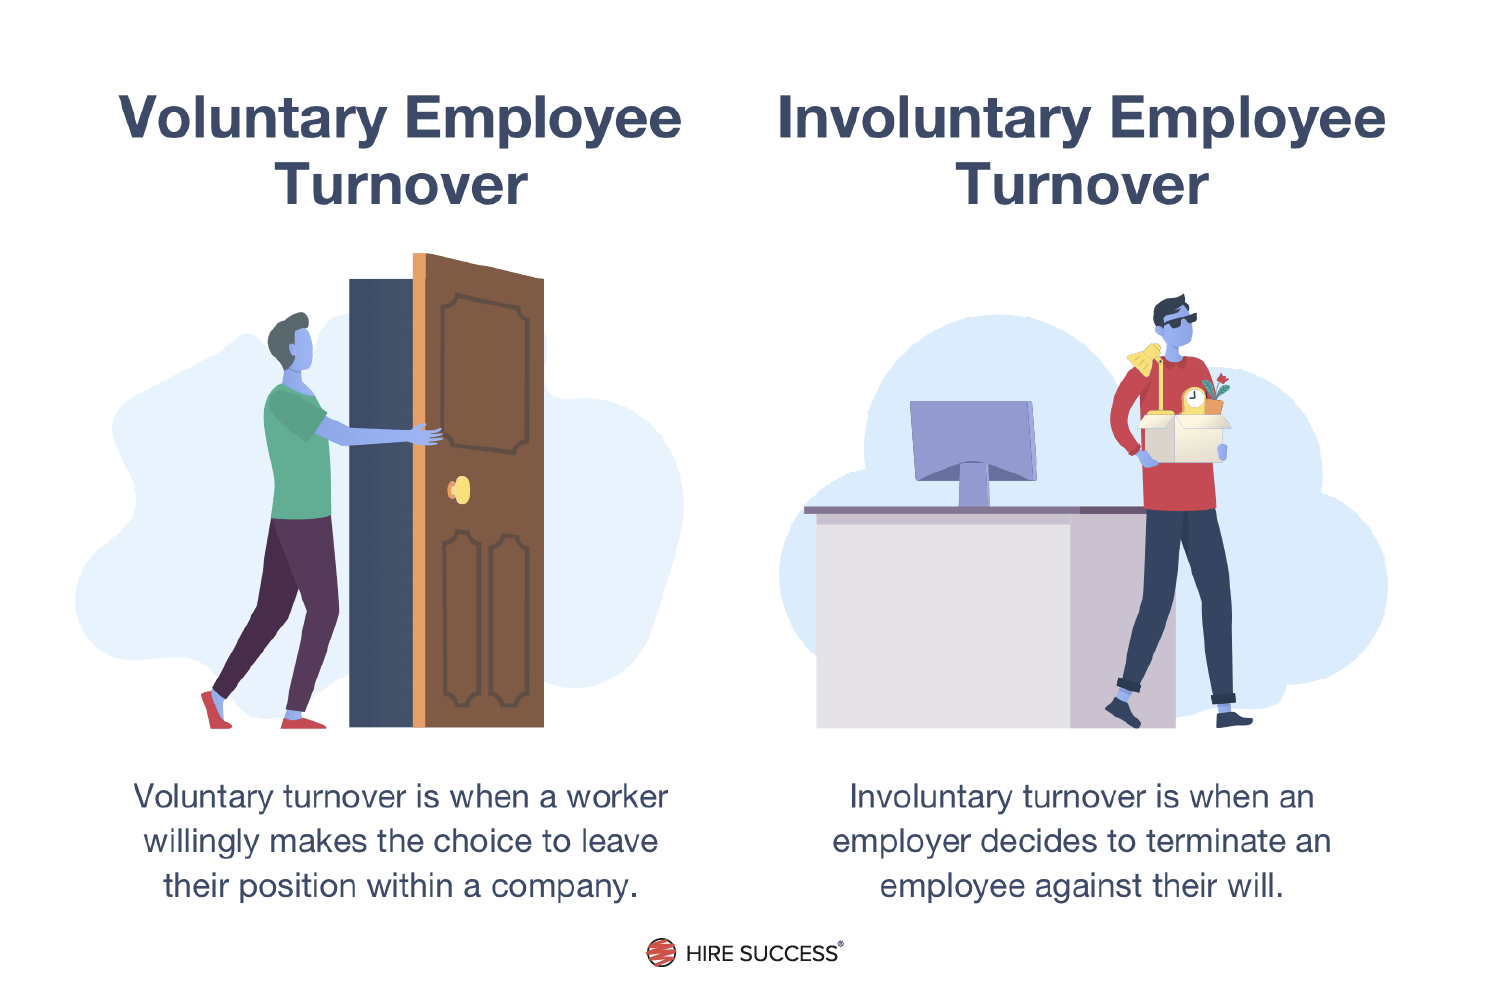 types of employee turnover - voluntary and involuntary